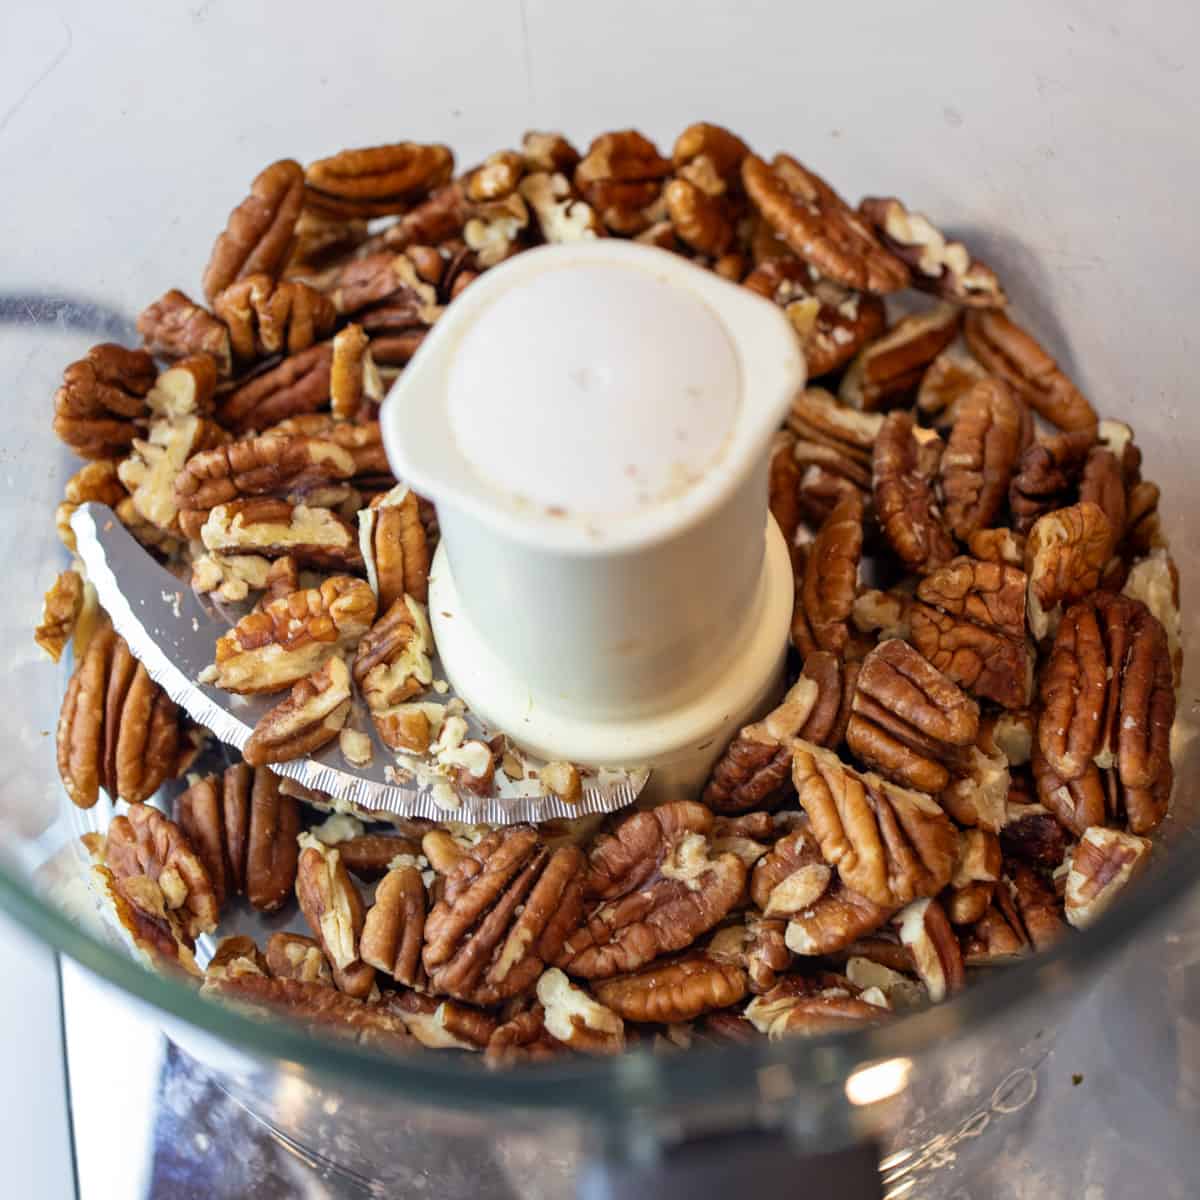 Pecans placed in a food processor ready to be ground.